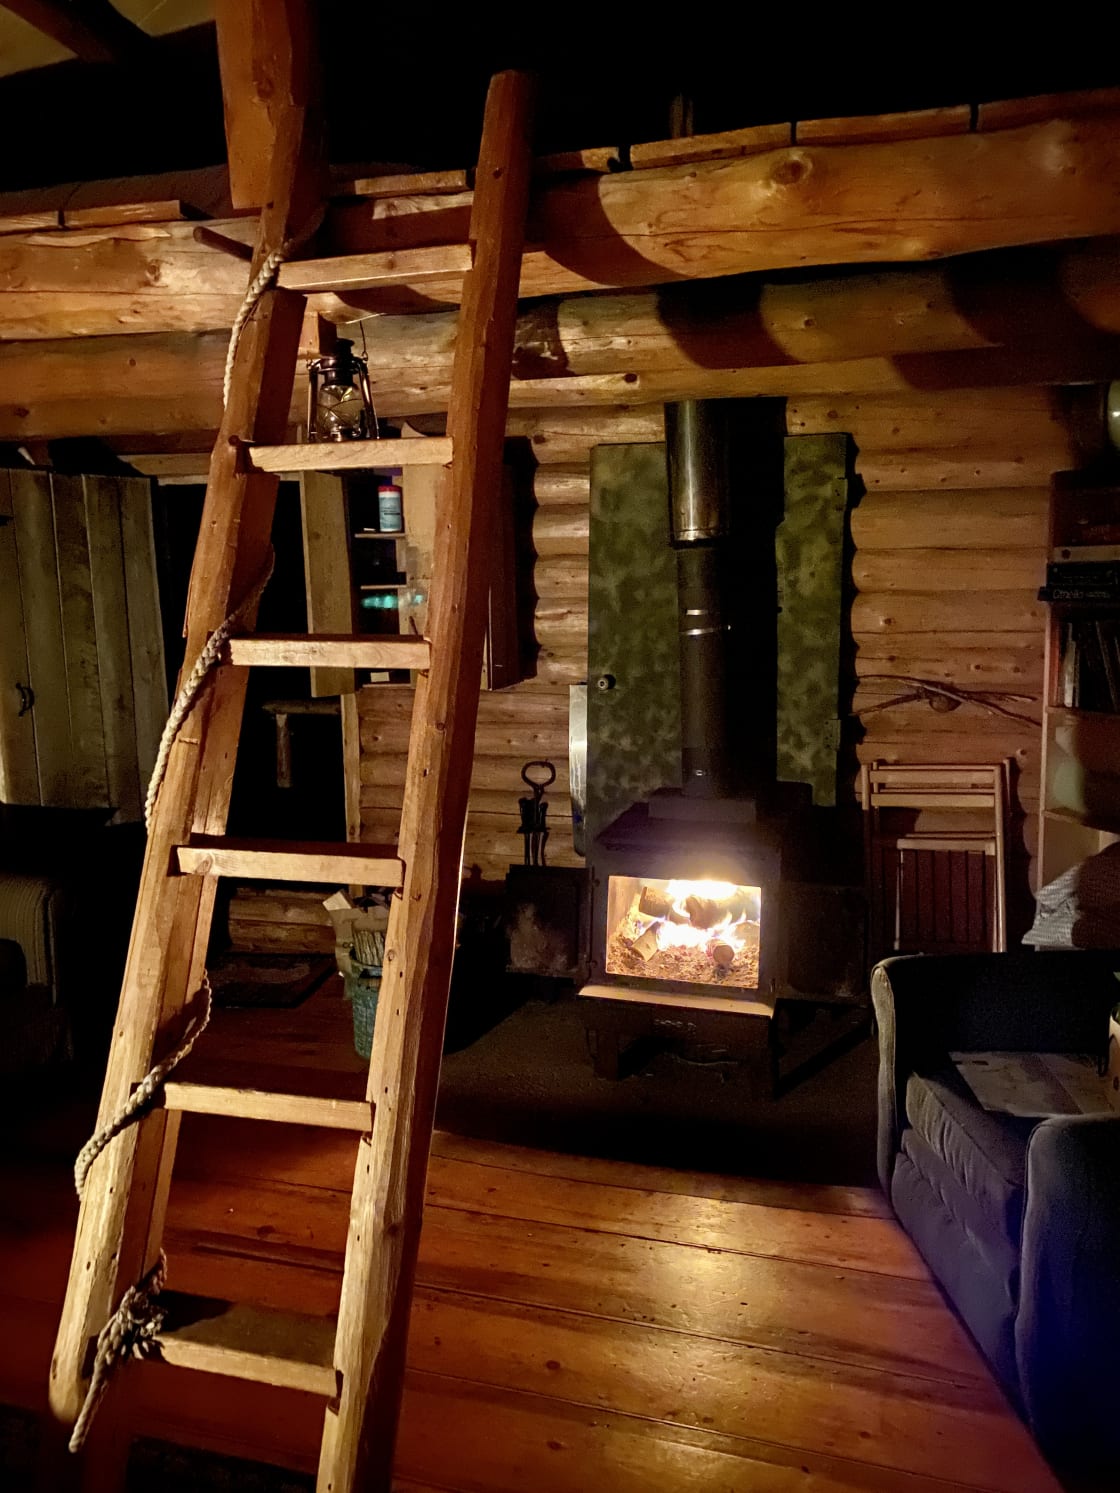 Woodstove and ladder to the loft